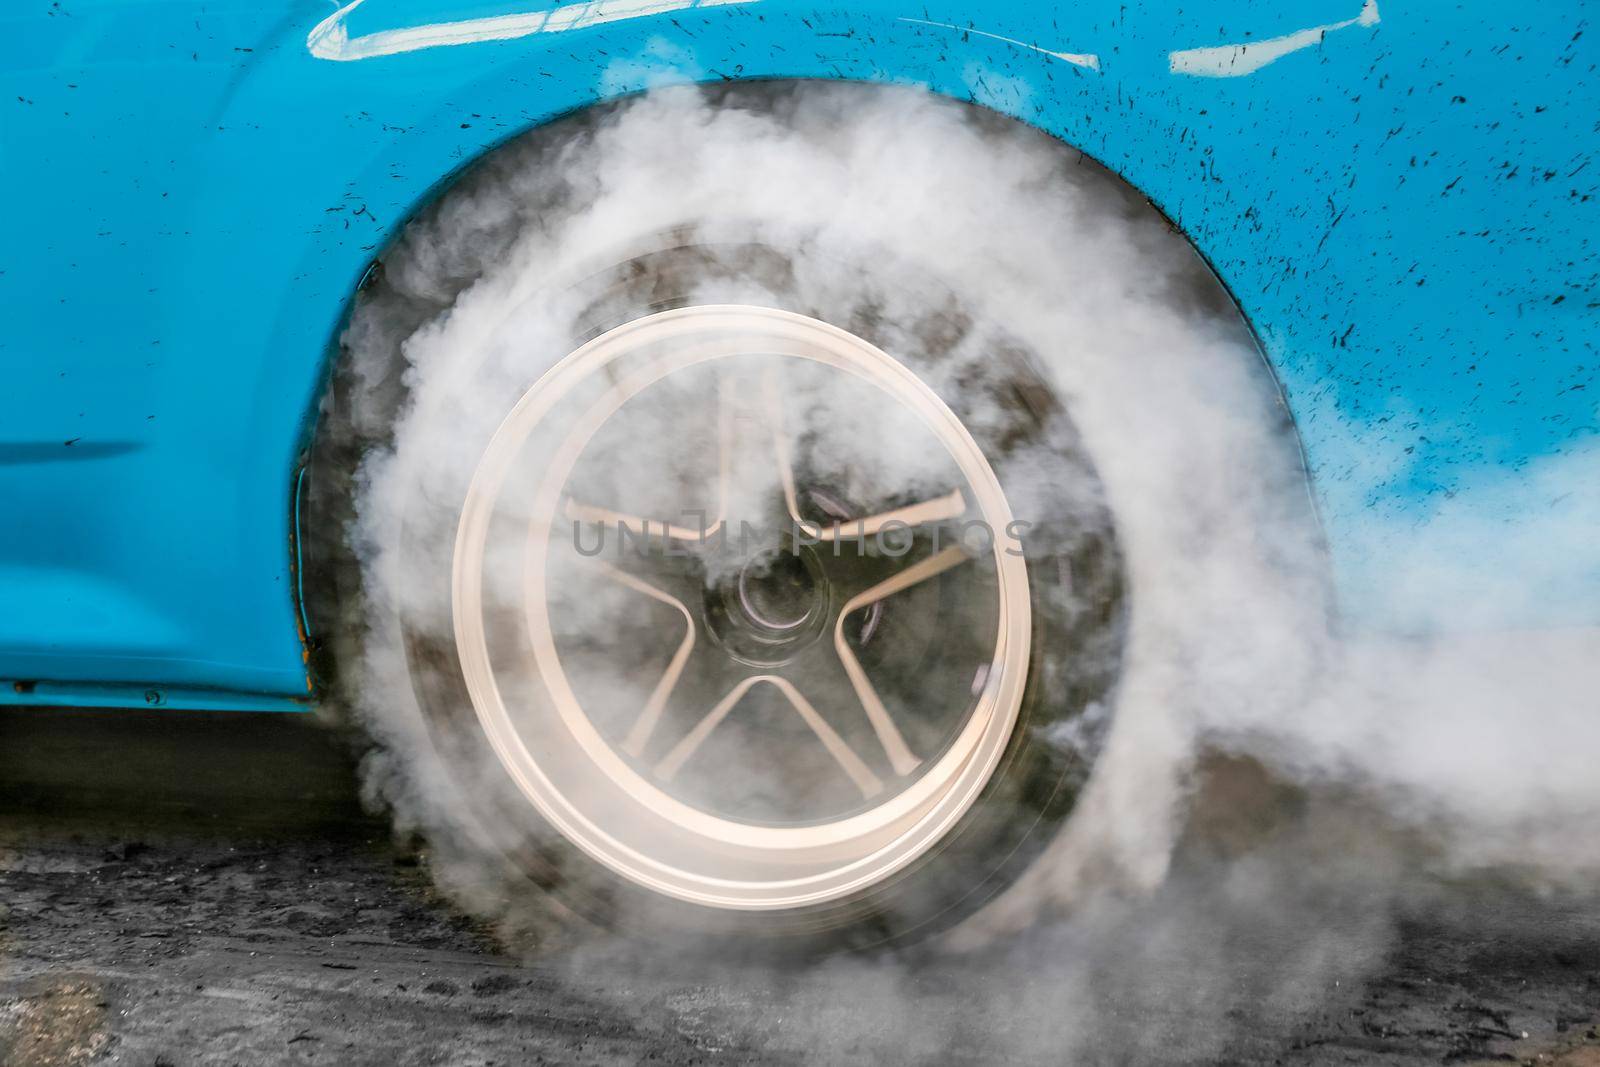 Drag racing car burns rubber off its tires in preparation for the race by toa55